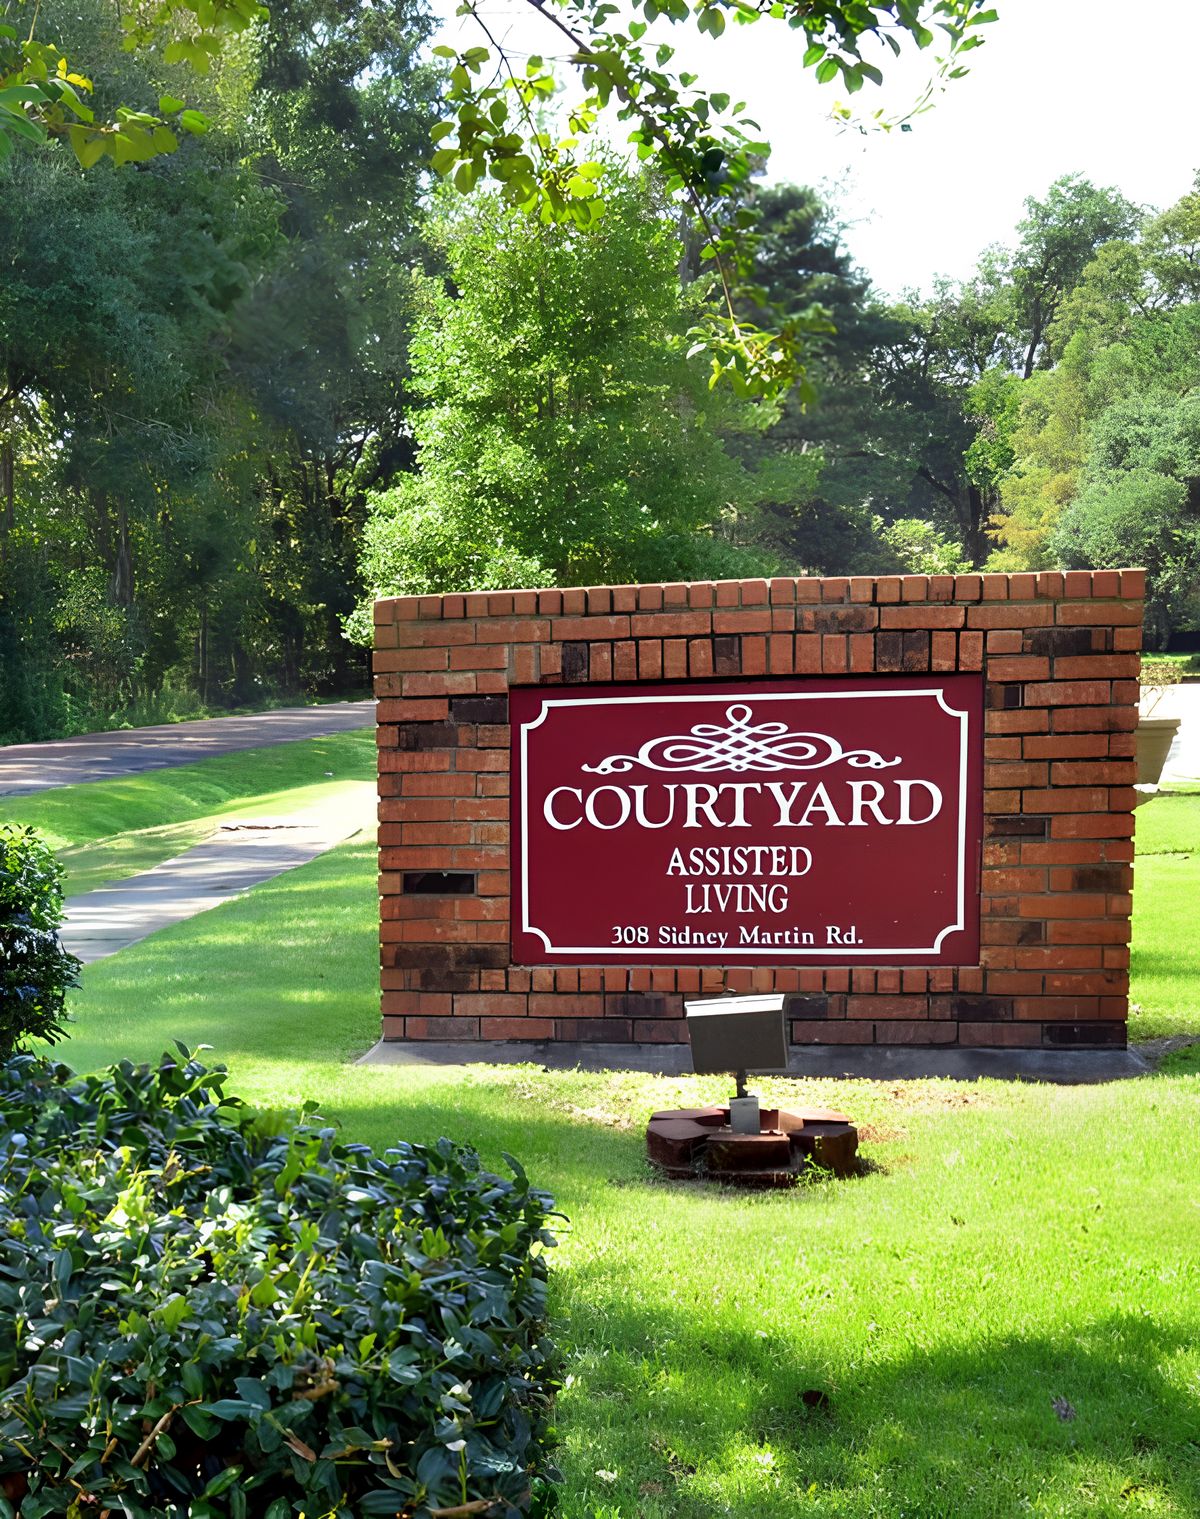 Courtyard Retirement & Assisted Living 1